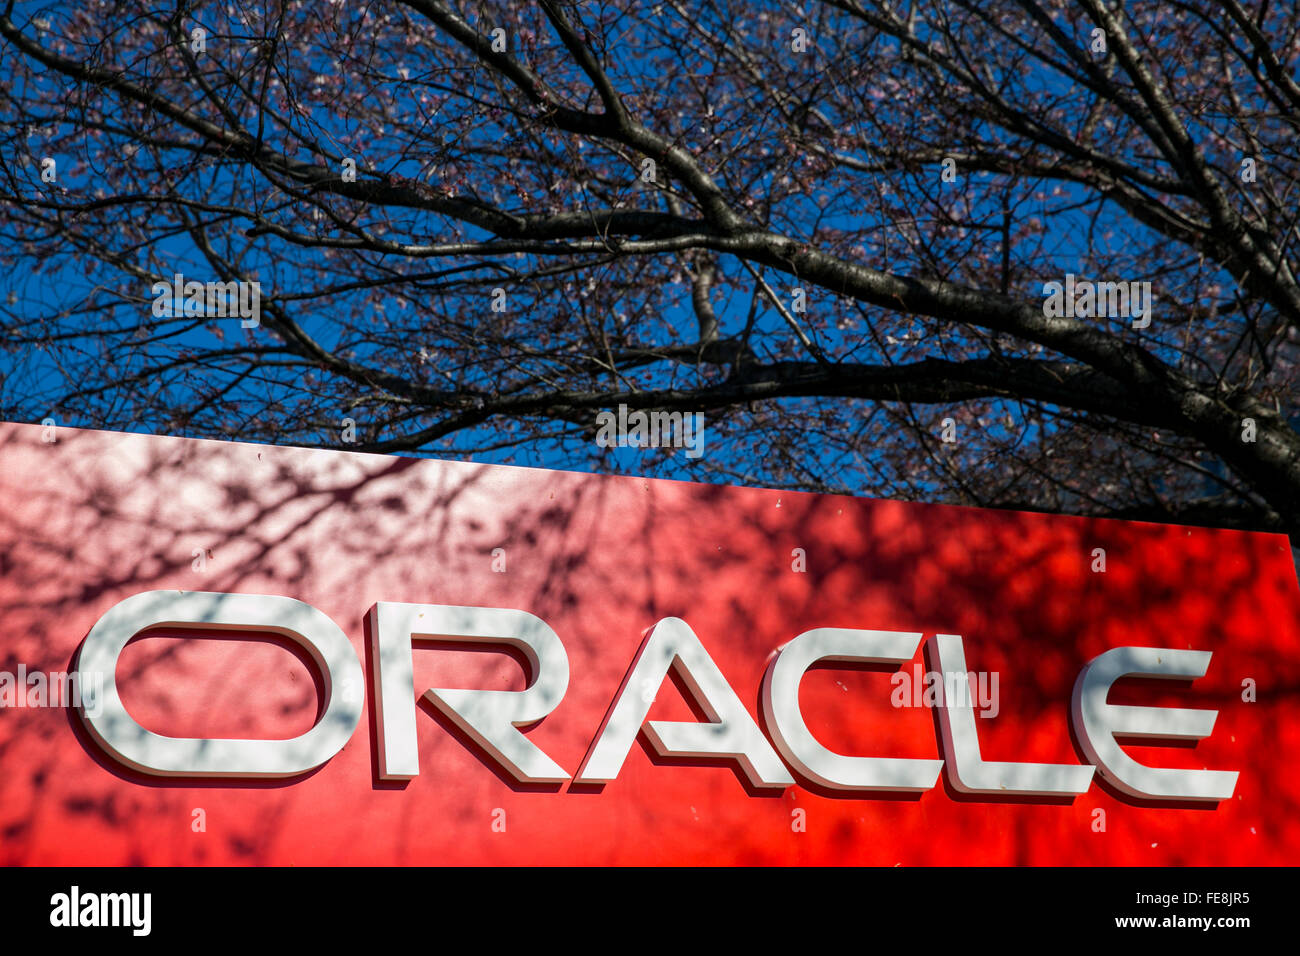 A logo sign outside of an office building occupied by The Oracle Corporation in Columbia, Maryland on January 2, 2016. Stock Photo